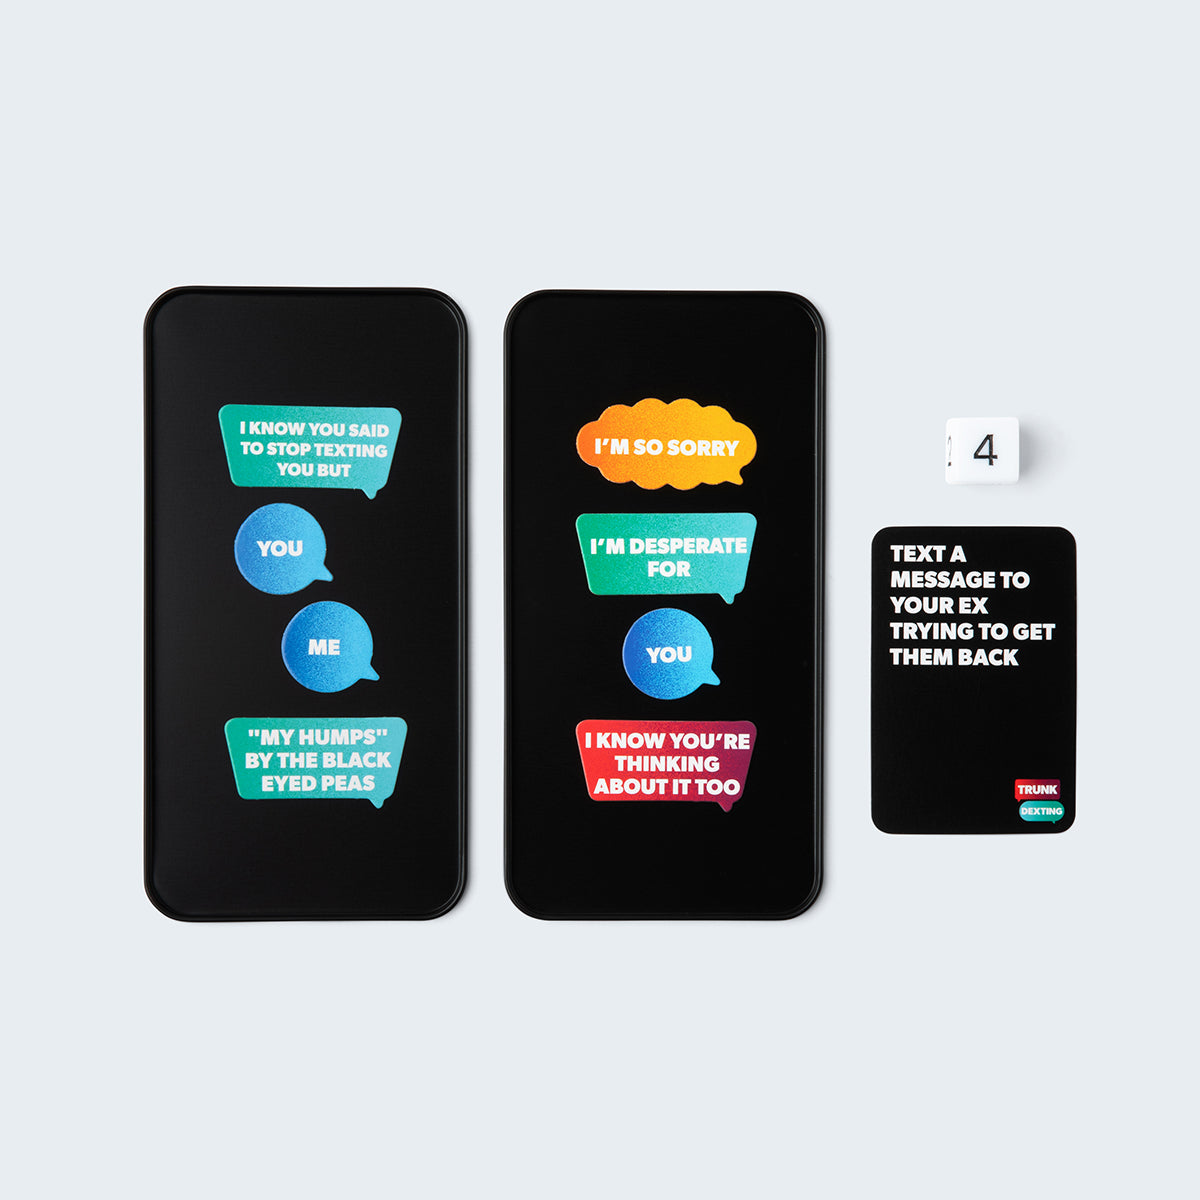 Trunk Dexting — The Card Game of Twisted Texts from the Creators of New Phone, Who Dis?